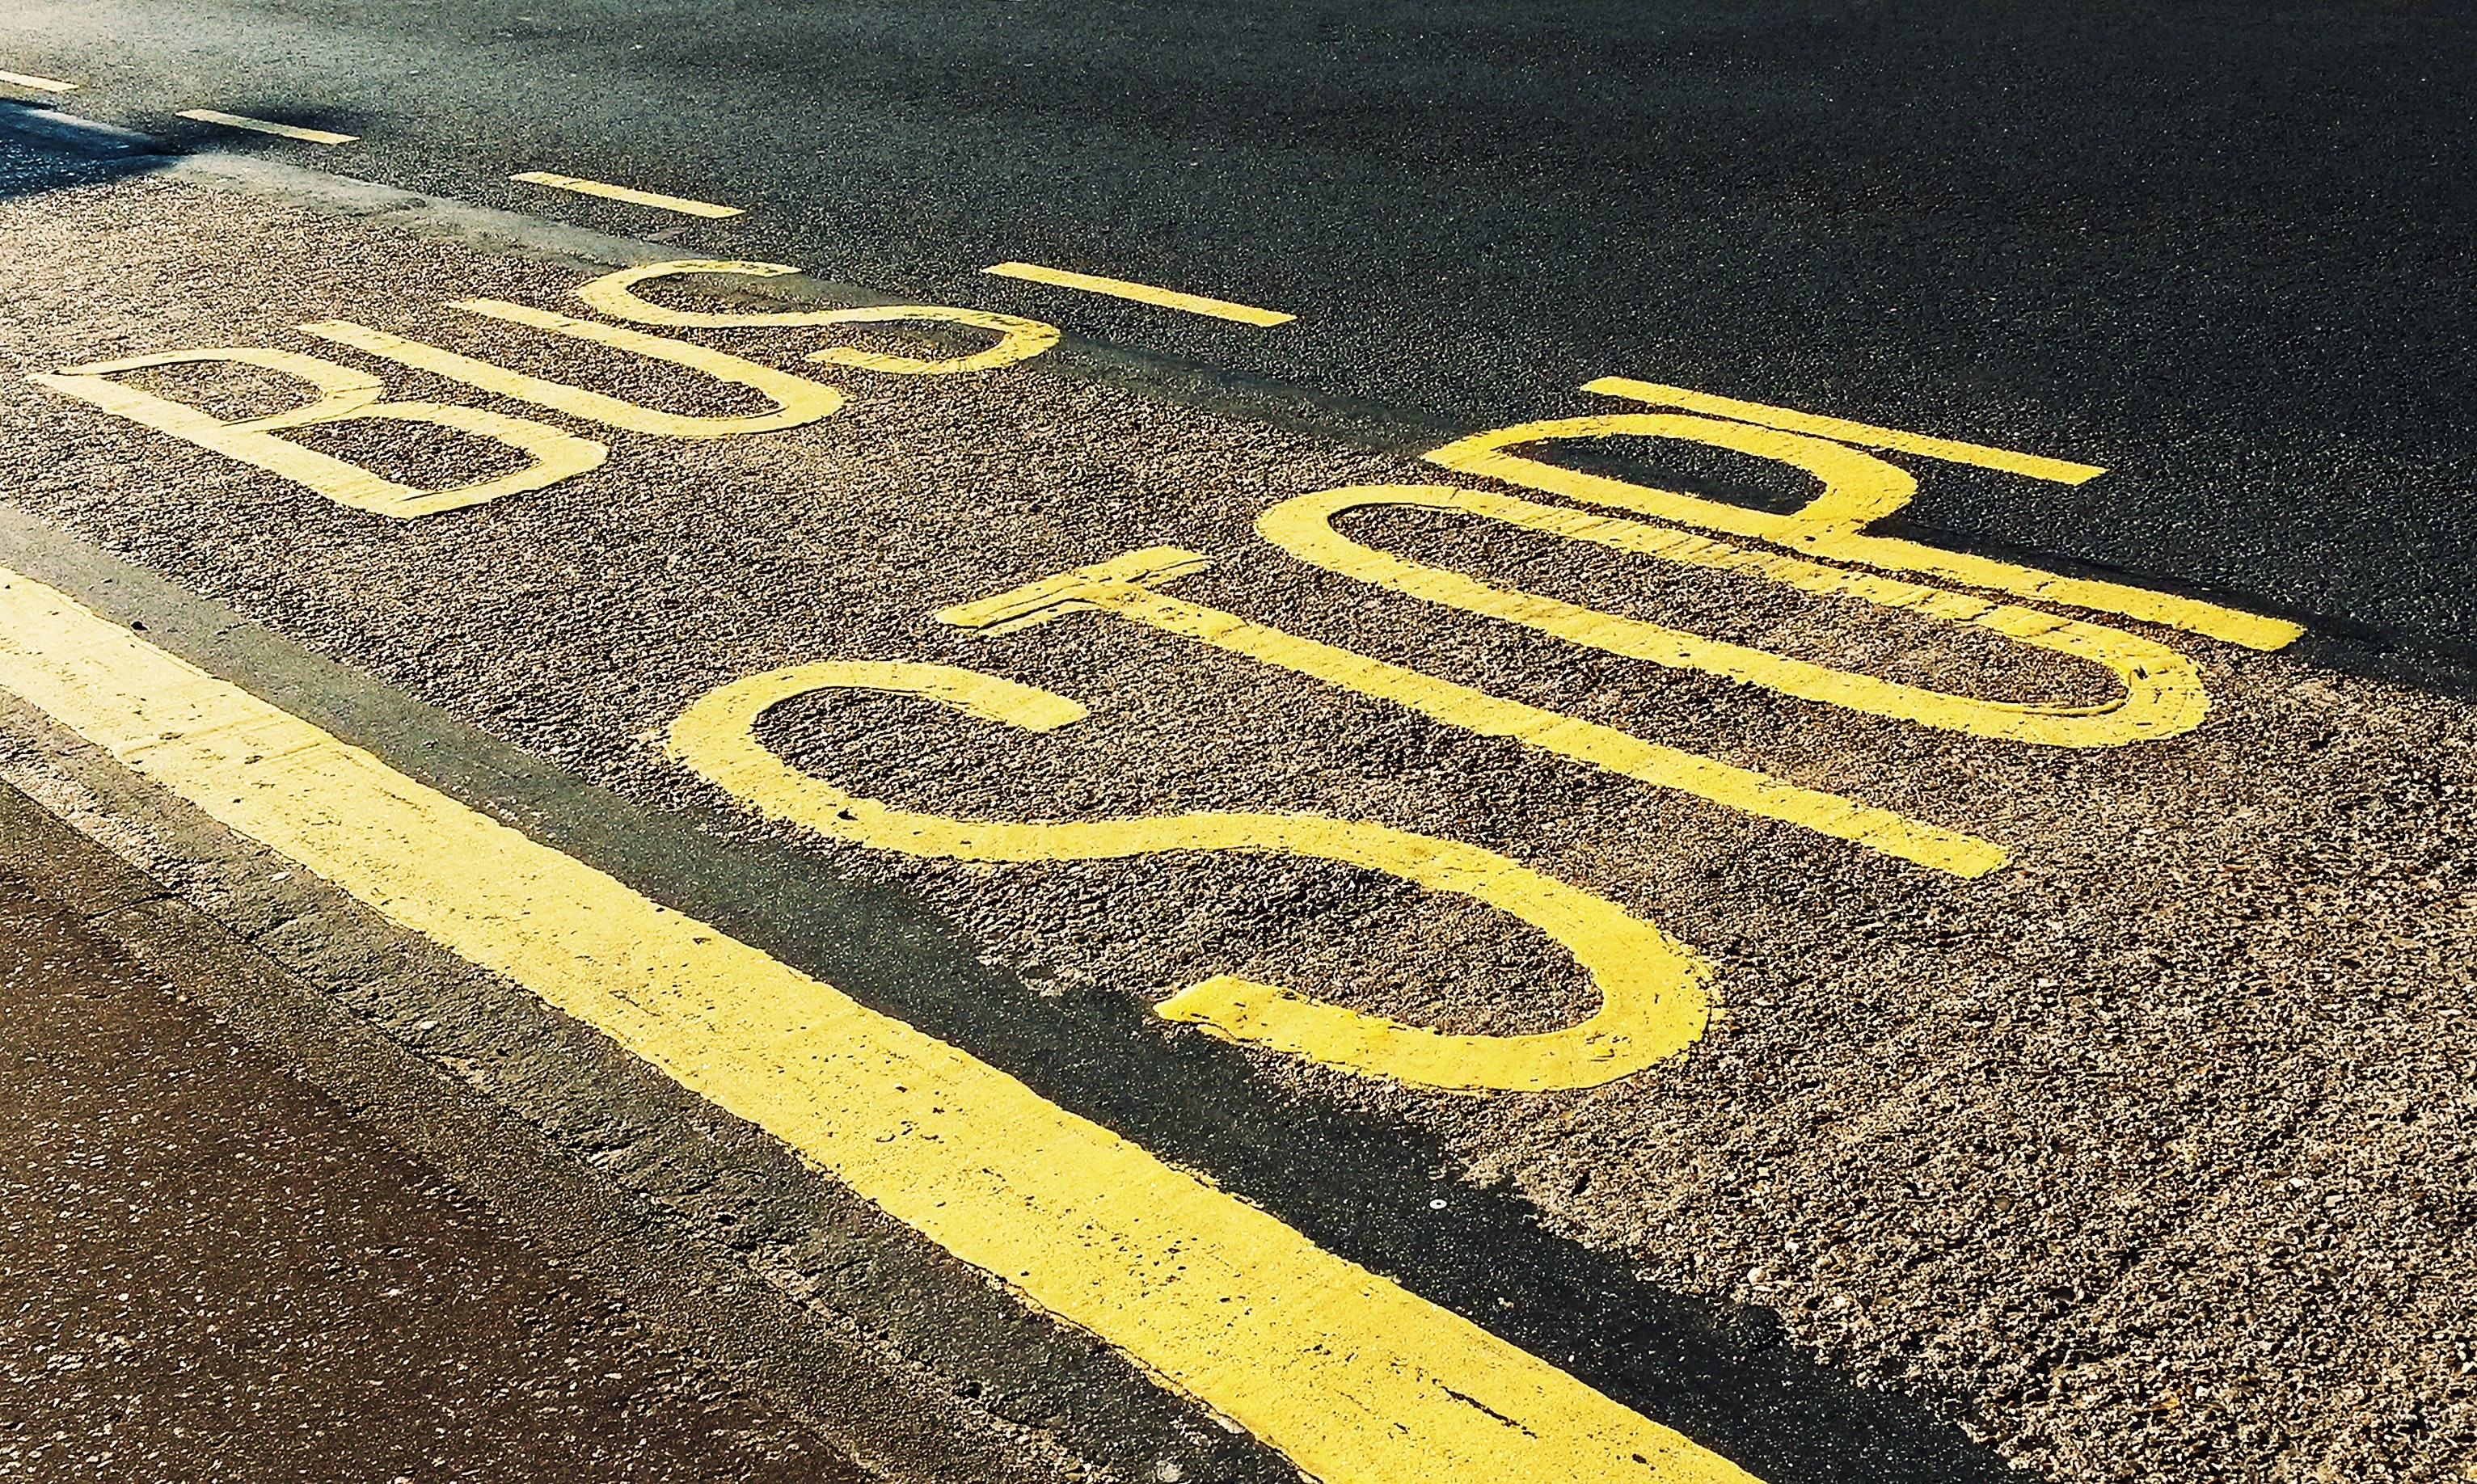 A road with the words Bus Stop painted on it in yellow.